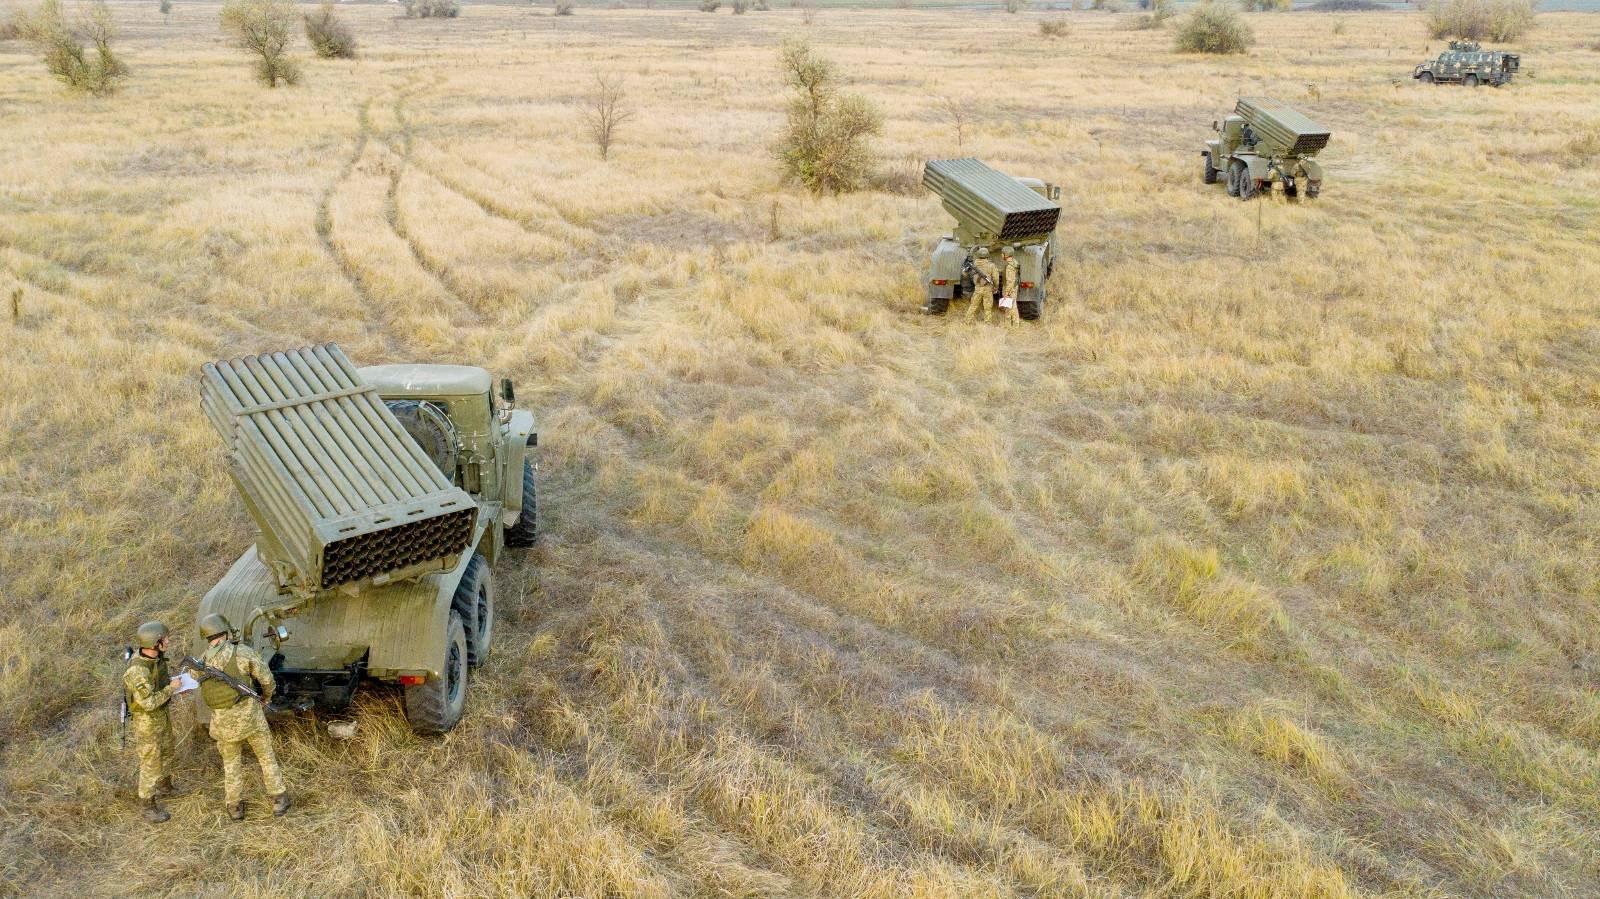 Service members of the Ukrainian Armed Forces gather near vehicles, including BM-21 "Grad" multiple rocket launchers, during tactical military exercises at a shooting range in the Kherson region, Ukraine, January 19, 2022.